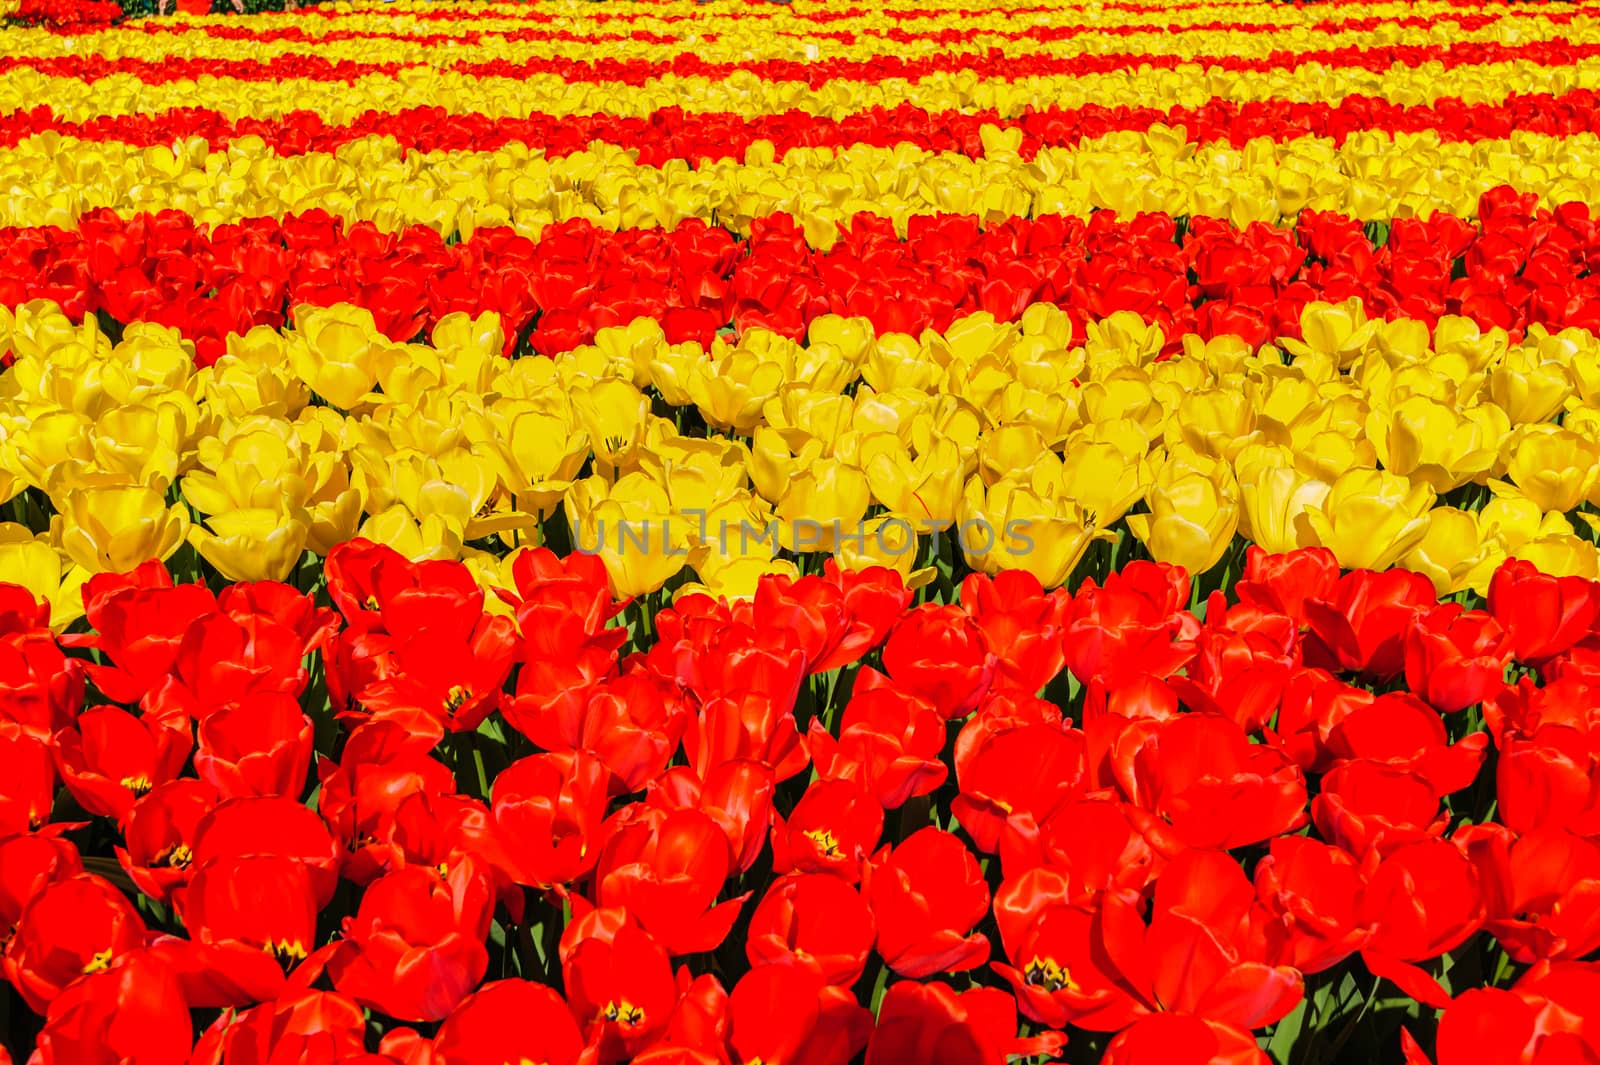 Large multicolored tulips flowerbed in Netherlands, unrecognizeable people at background